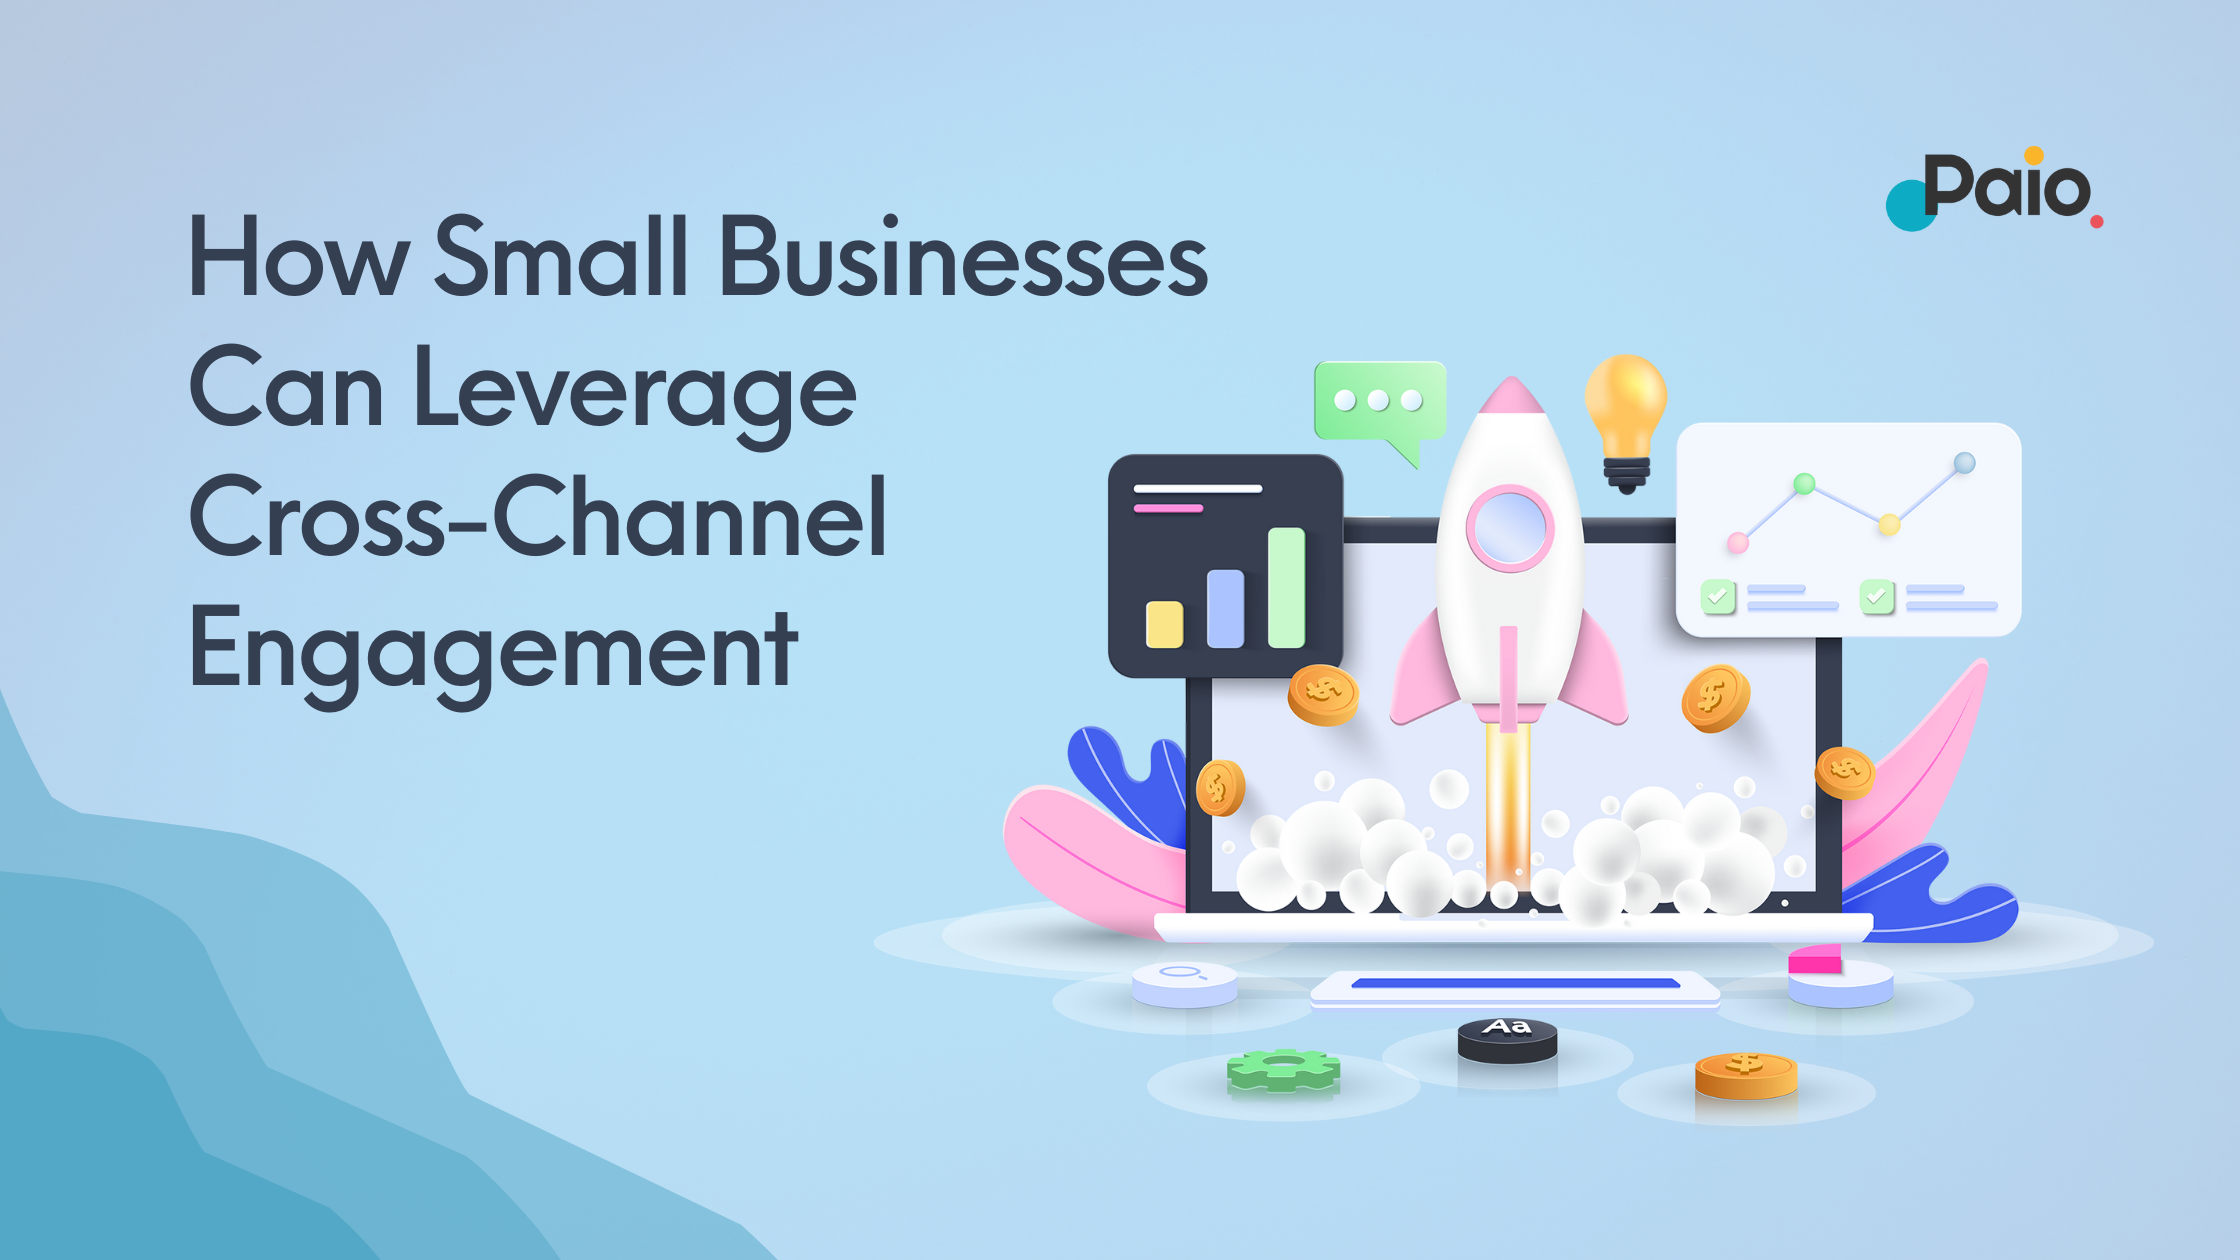 How Small Businesses Can Leverage Cross-Channel Engagement